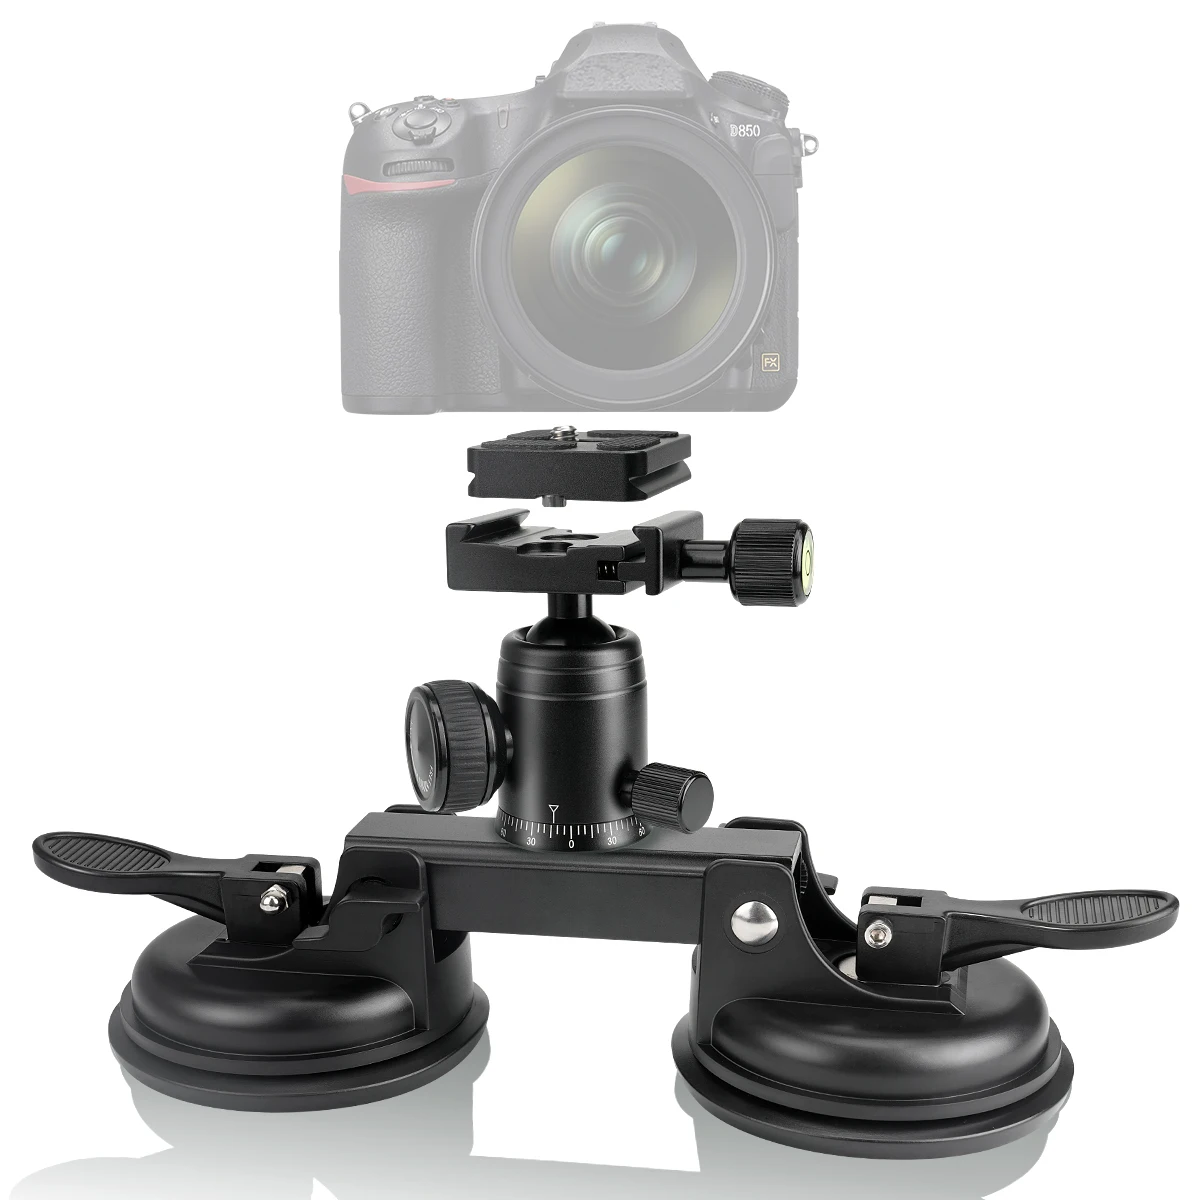 Double Camera Suction Cup | Double Mount Sports & Action Video Cameras - Aliexpress